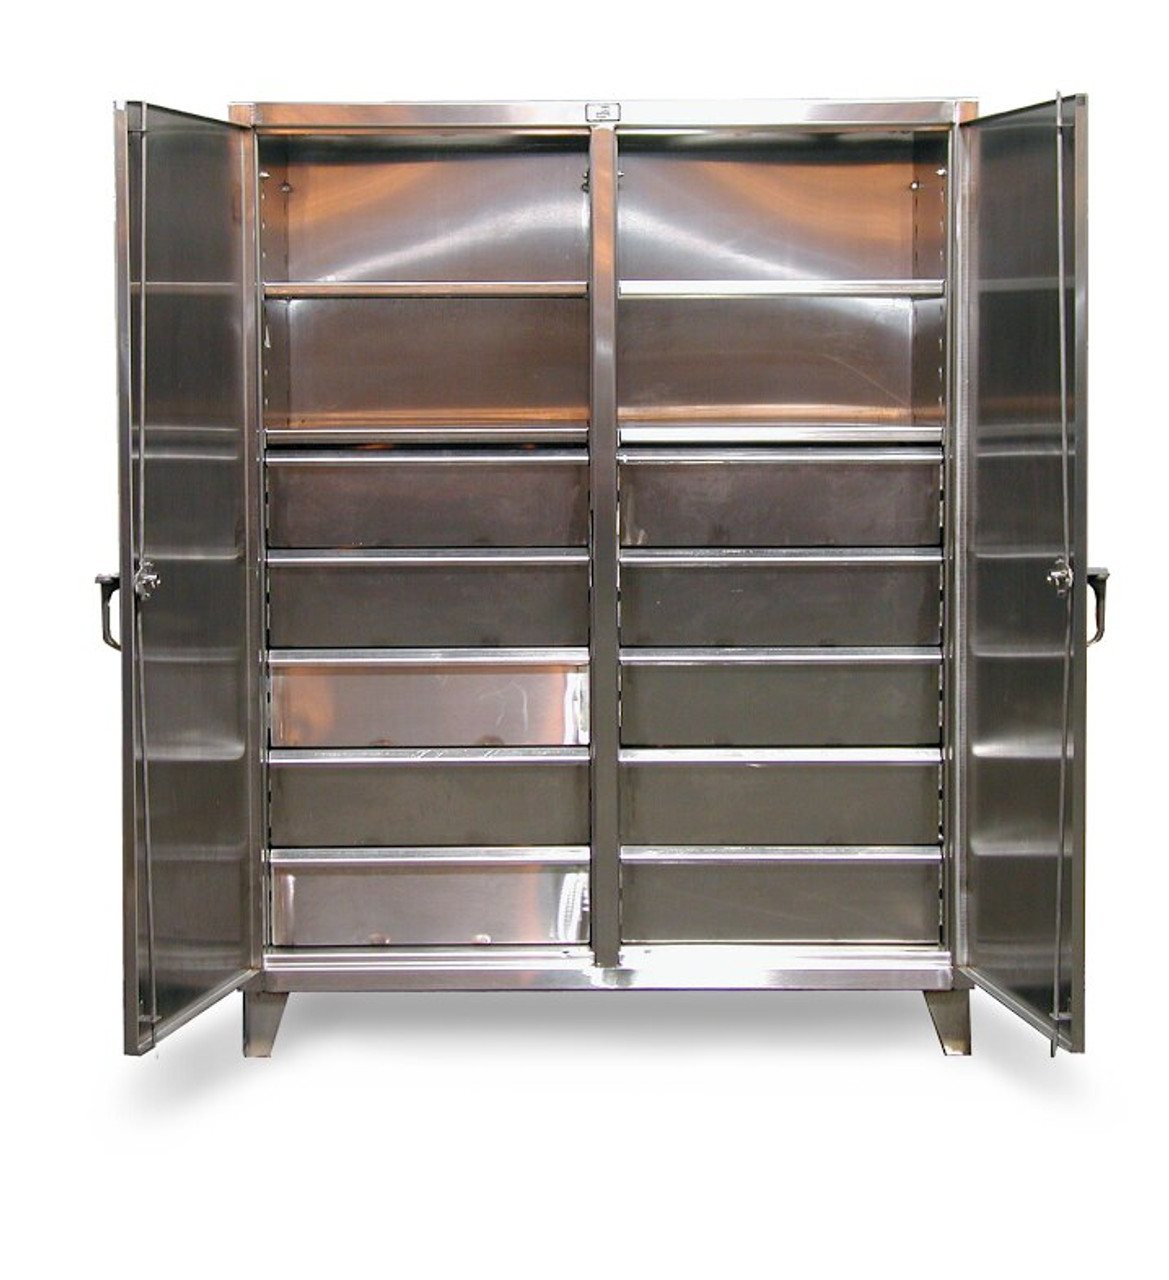 Stainless Steel Wire Shelving Unit - 60 x 24 x 72